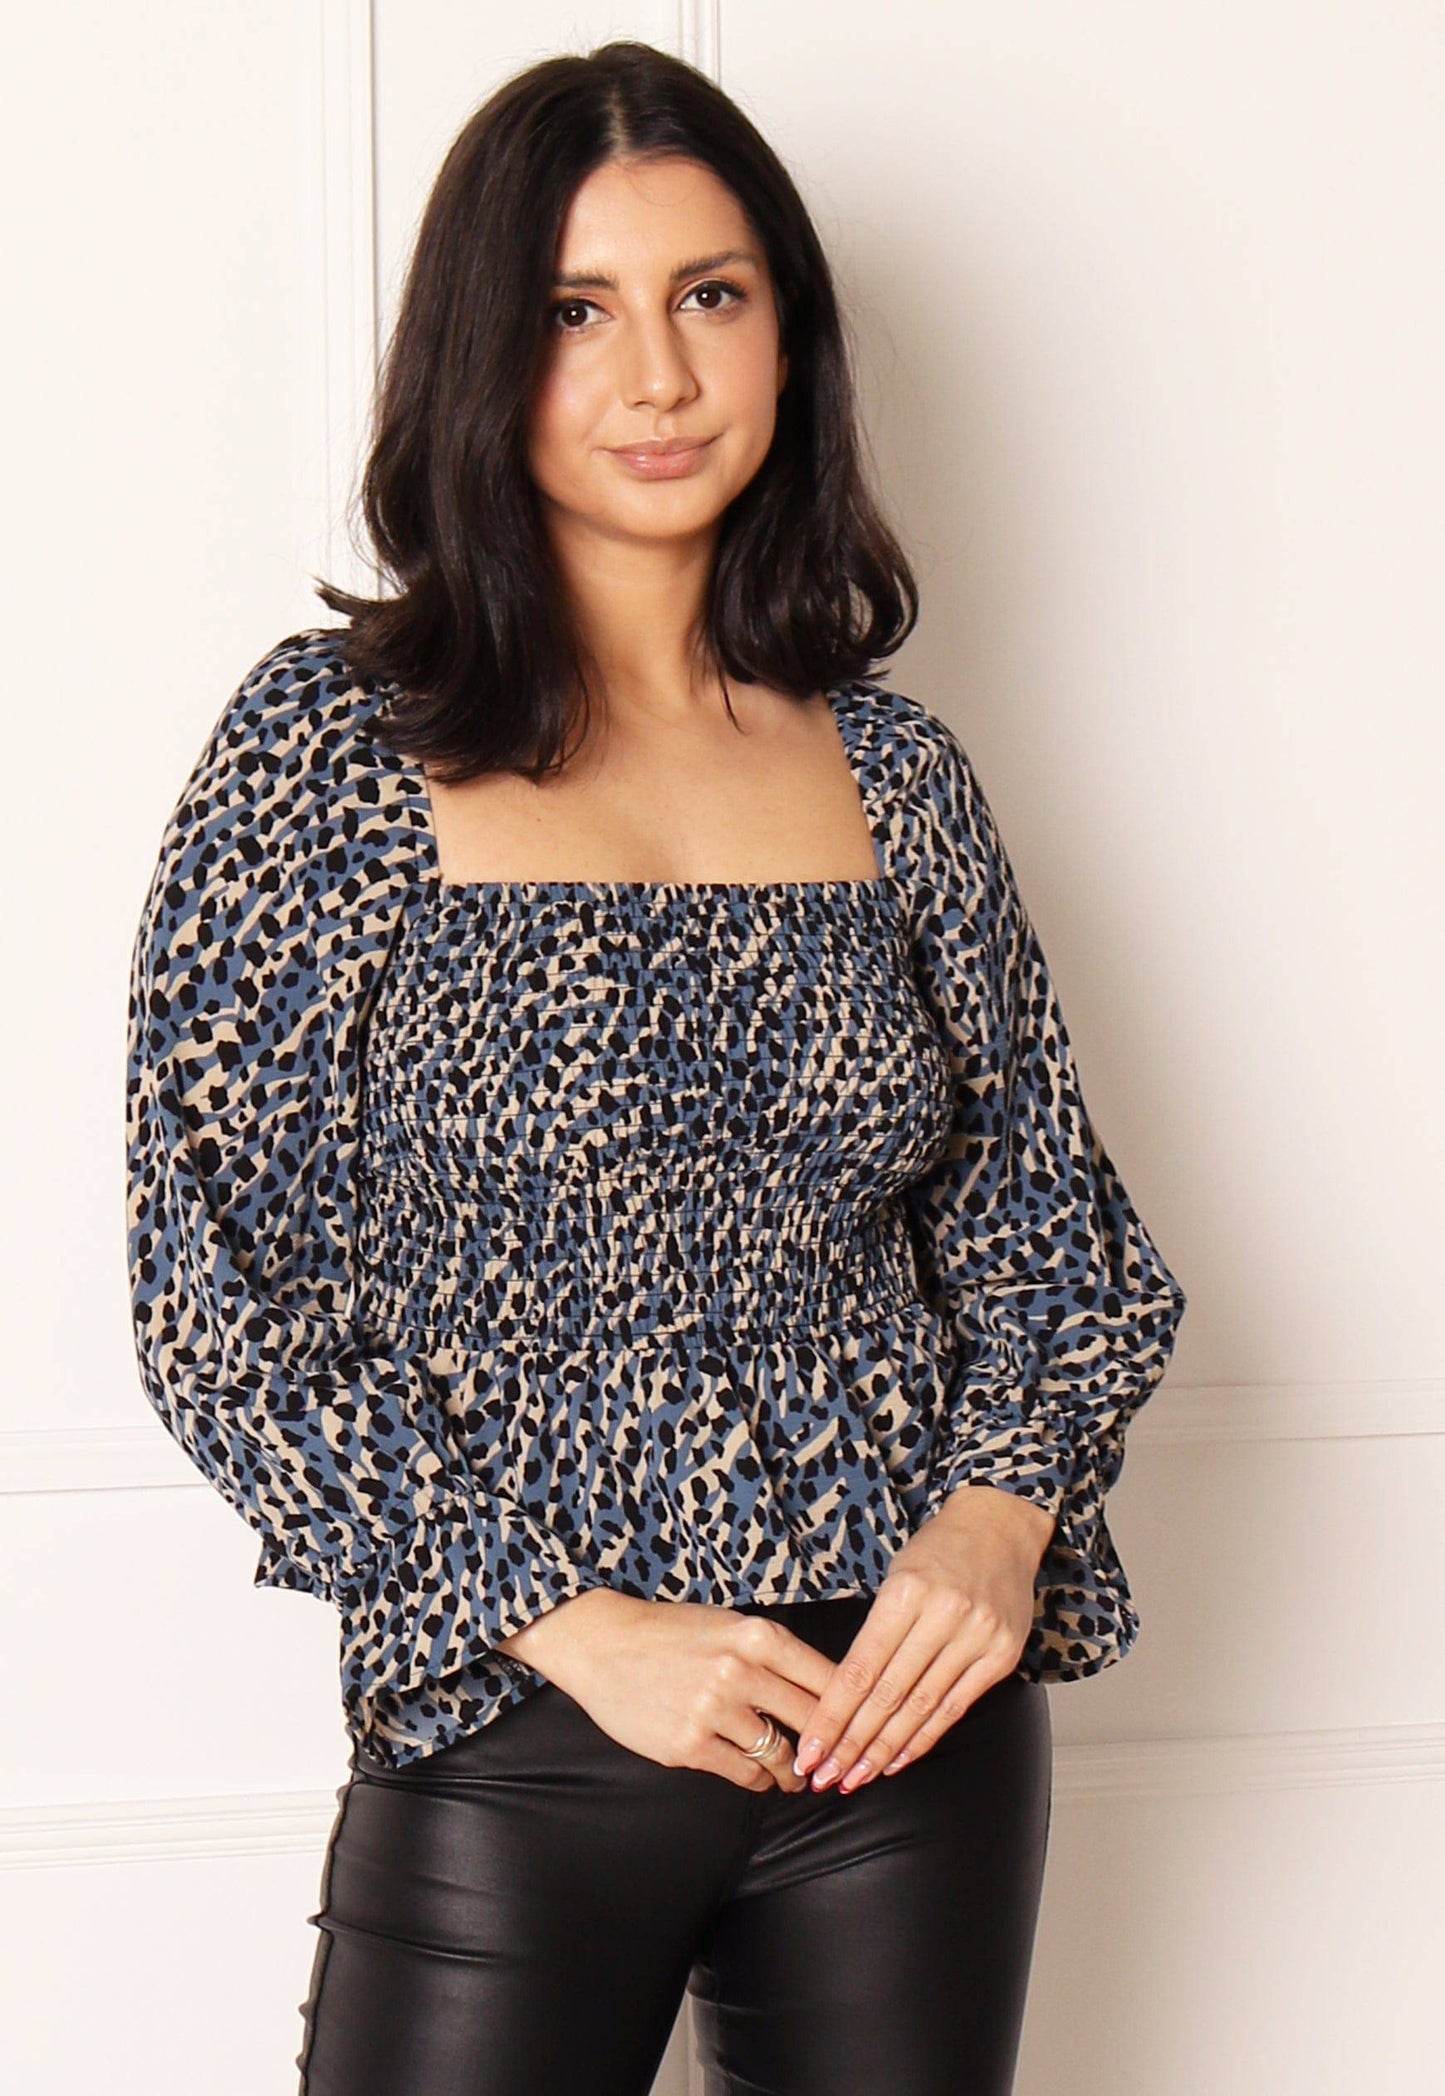 ONLY Lux Animal Print Shirred Top in Blue, Beige & Black - One Nation Clothing